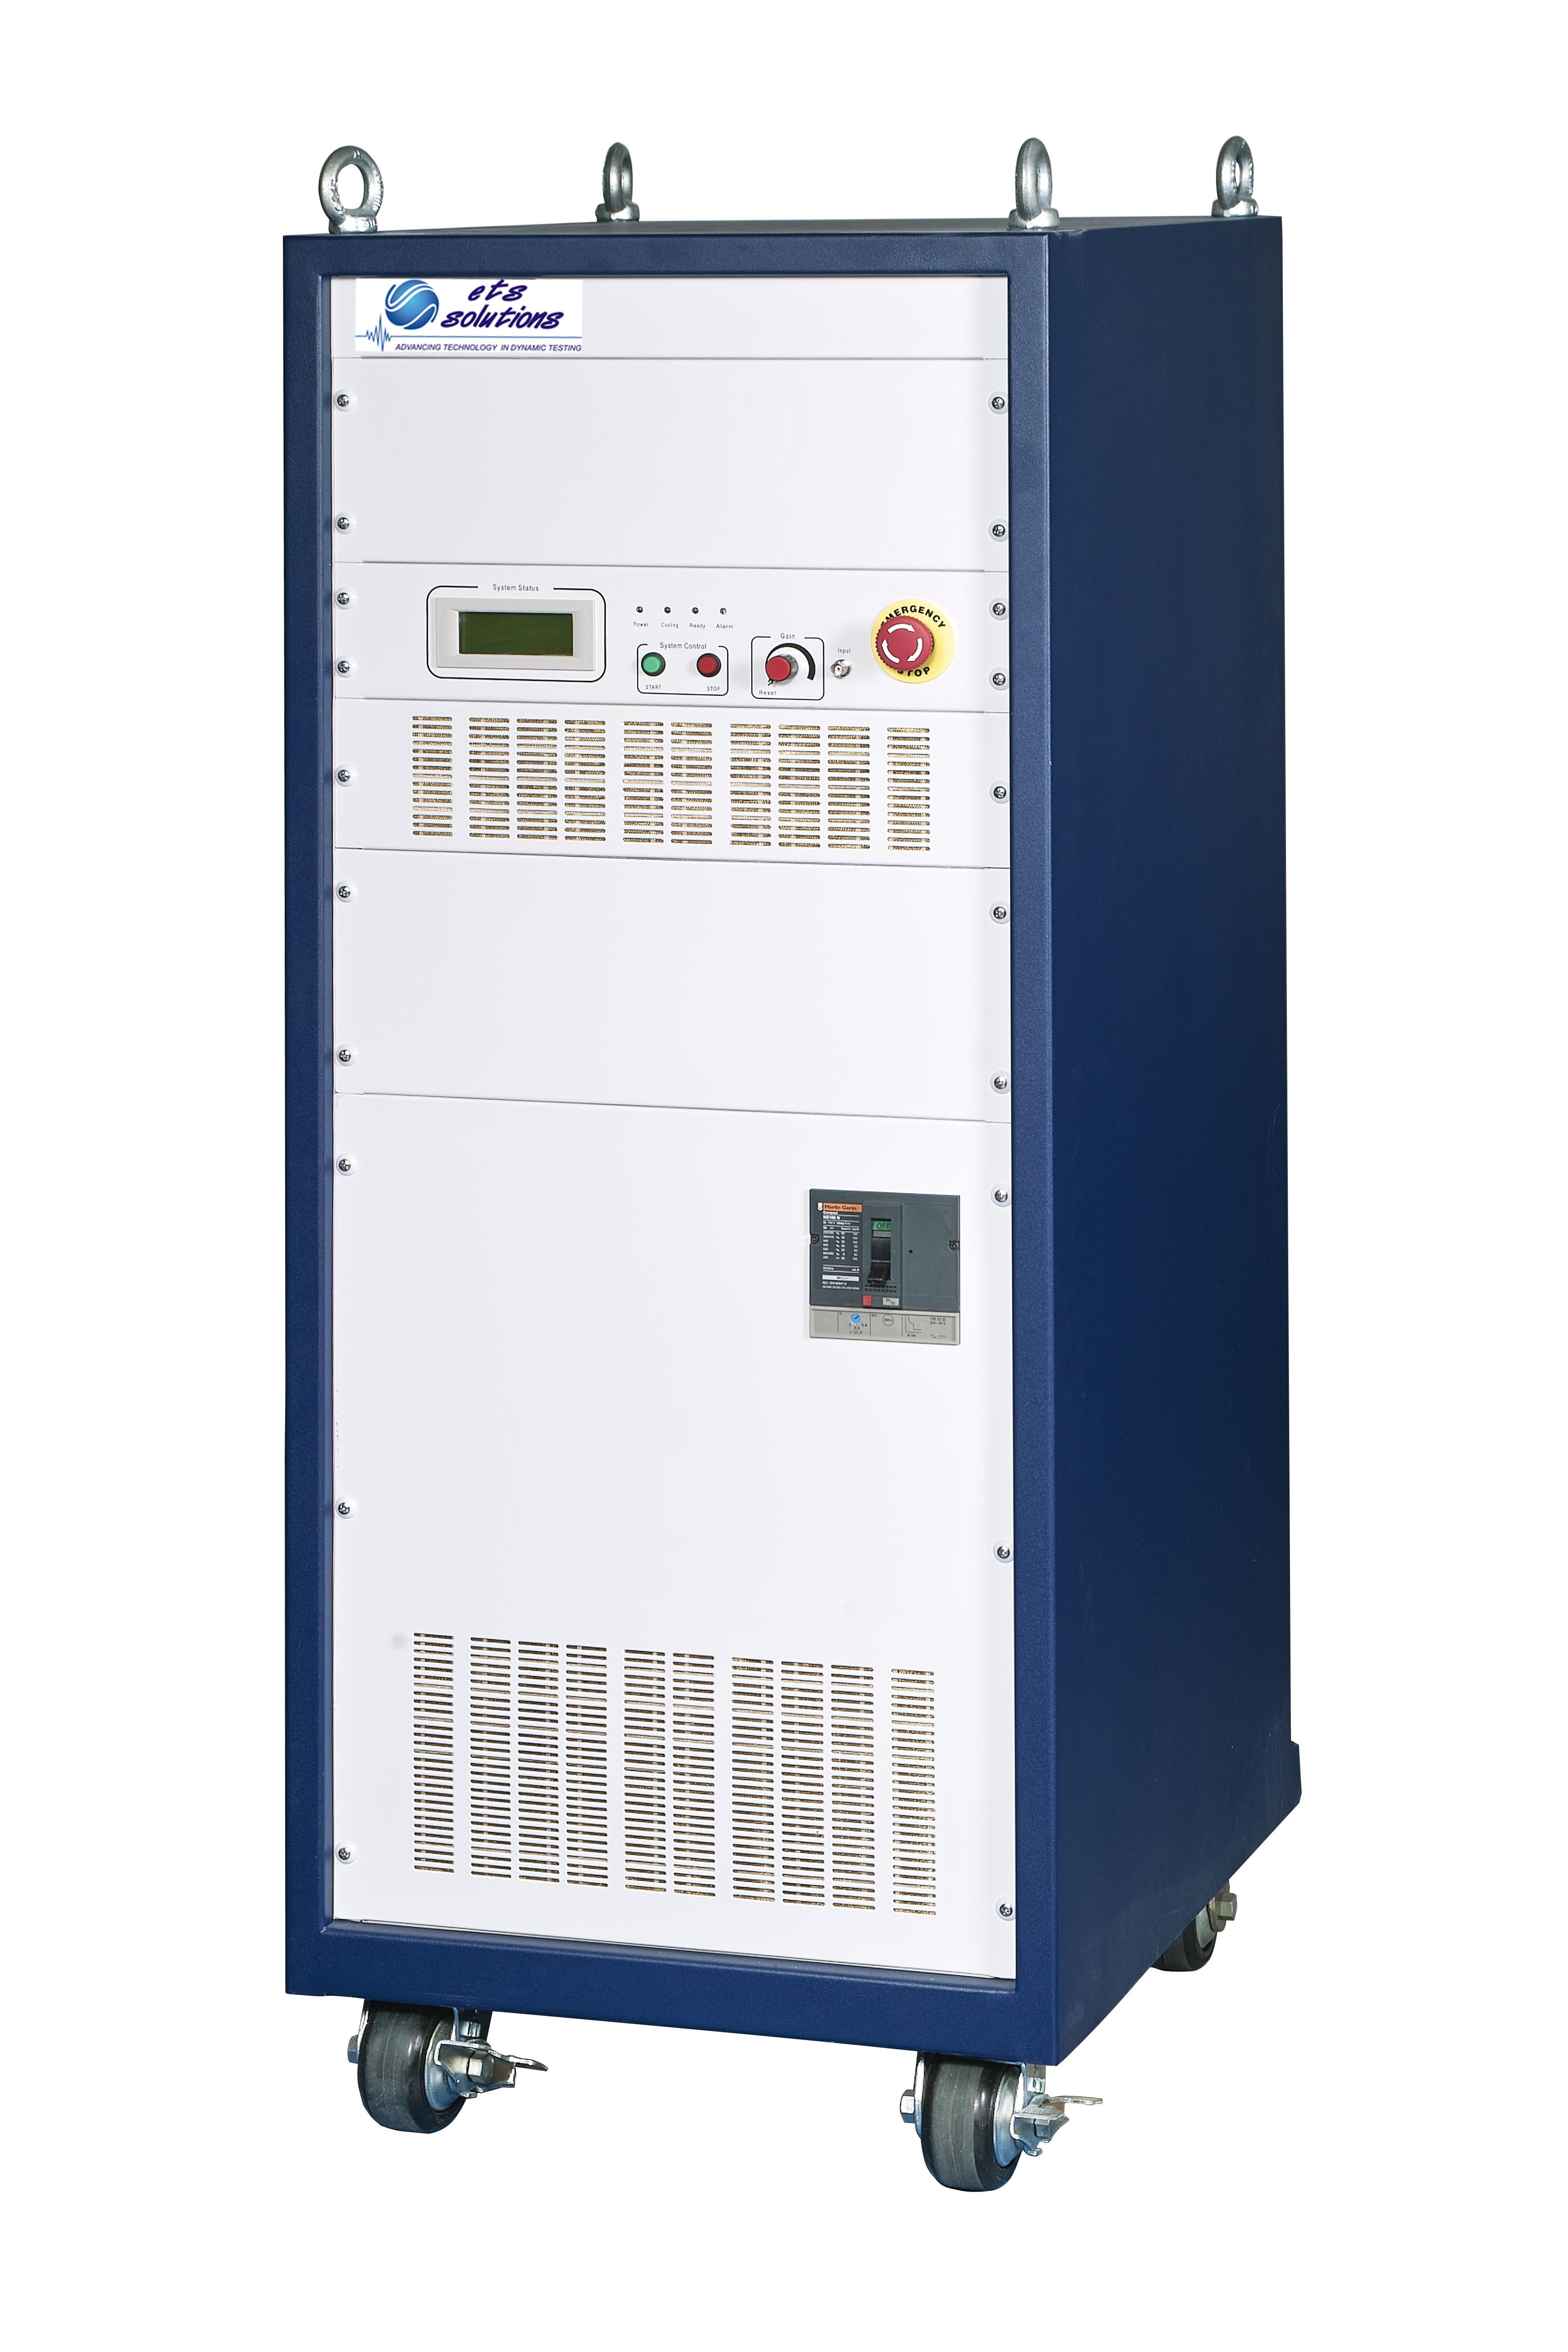 Cabinets: 1,
Max Power Output: 2kVA to 12kVA,
Max Output Voltage: 120V,
Max Output Current: 100A